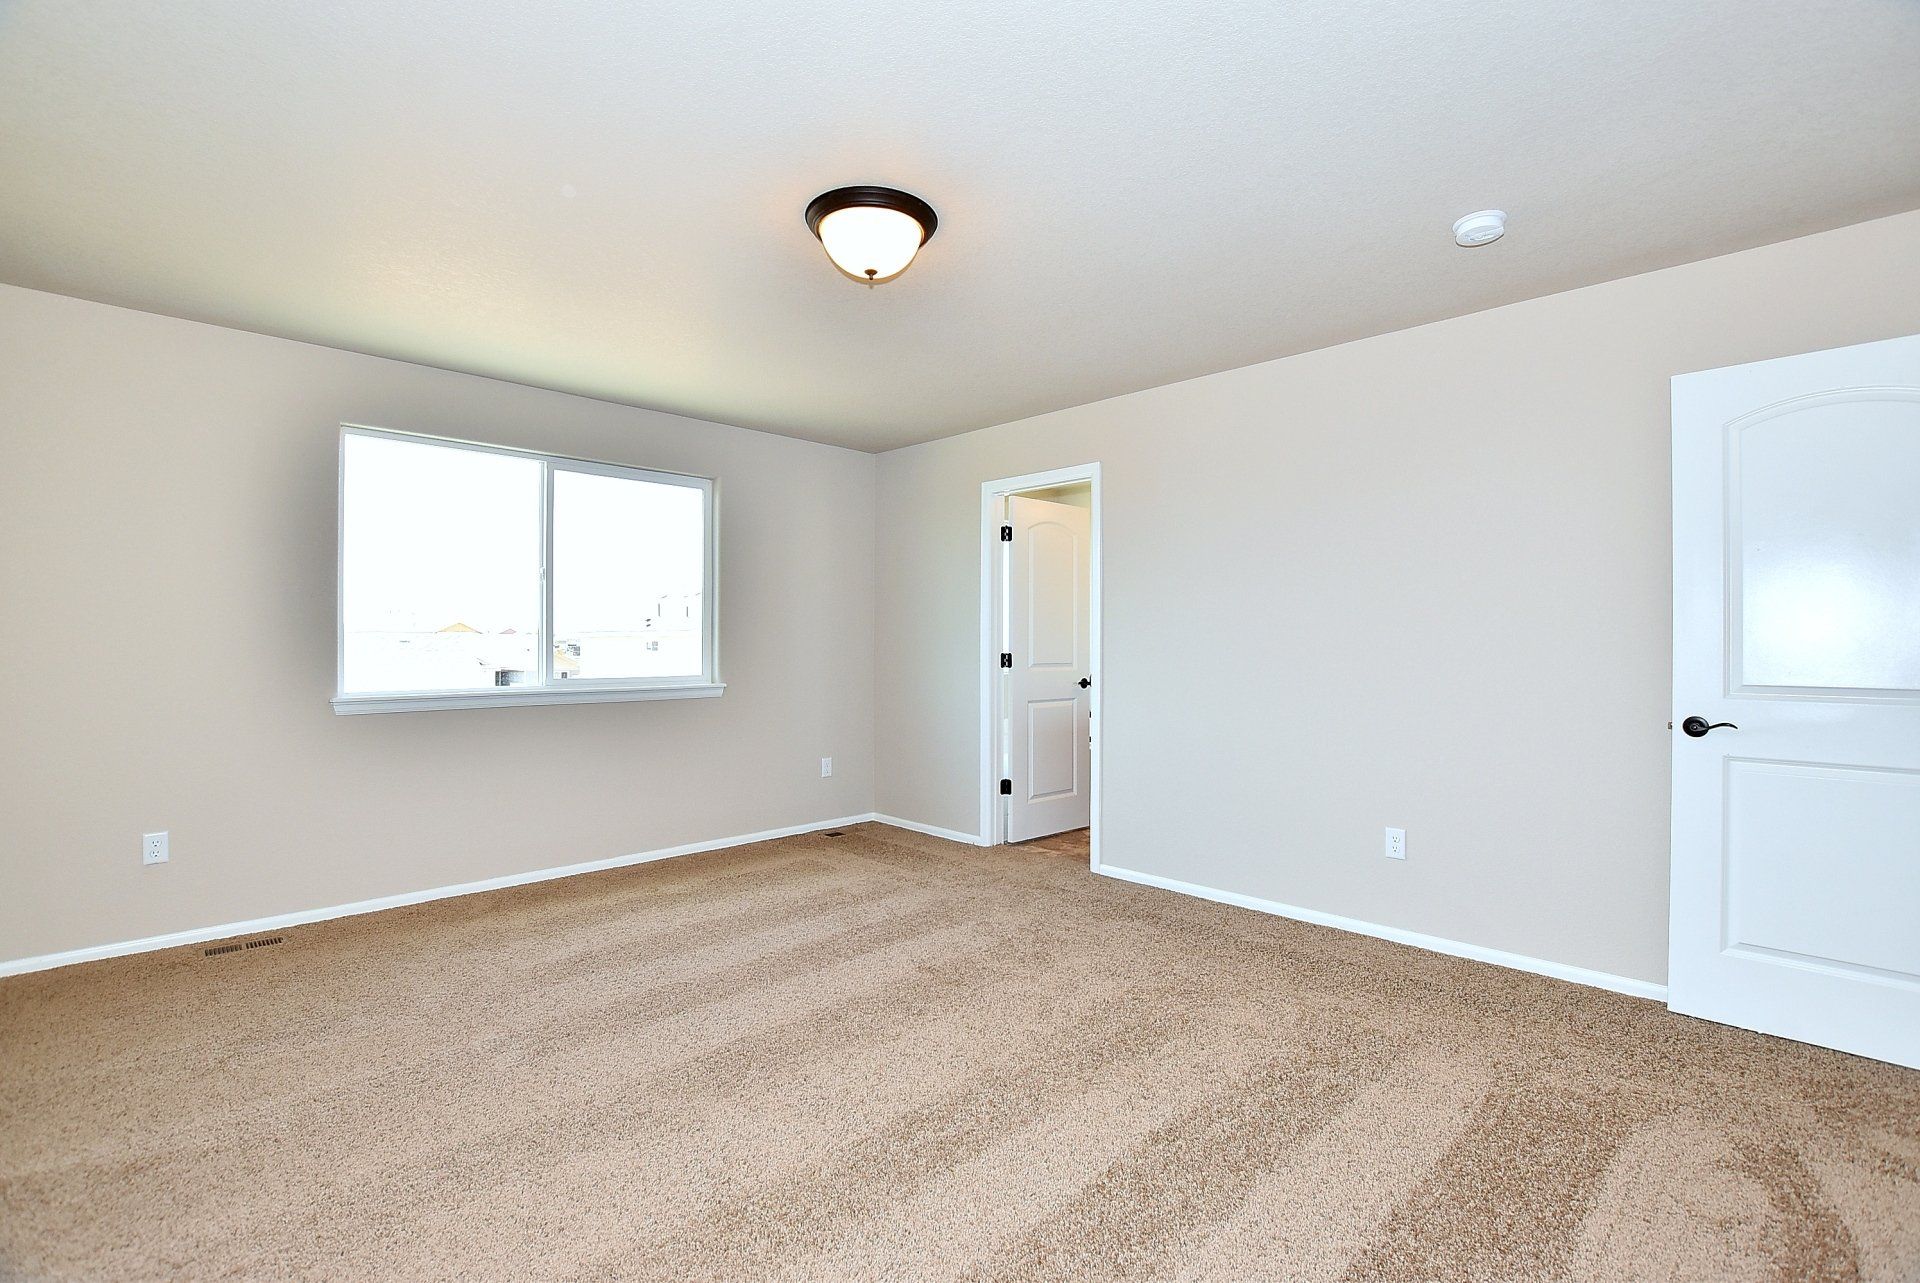 Large room with carpet flooring